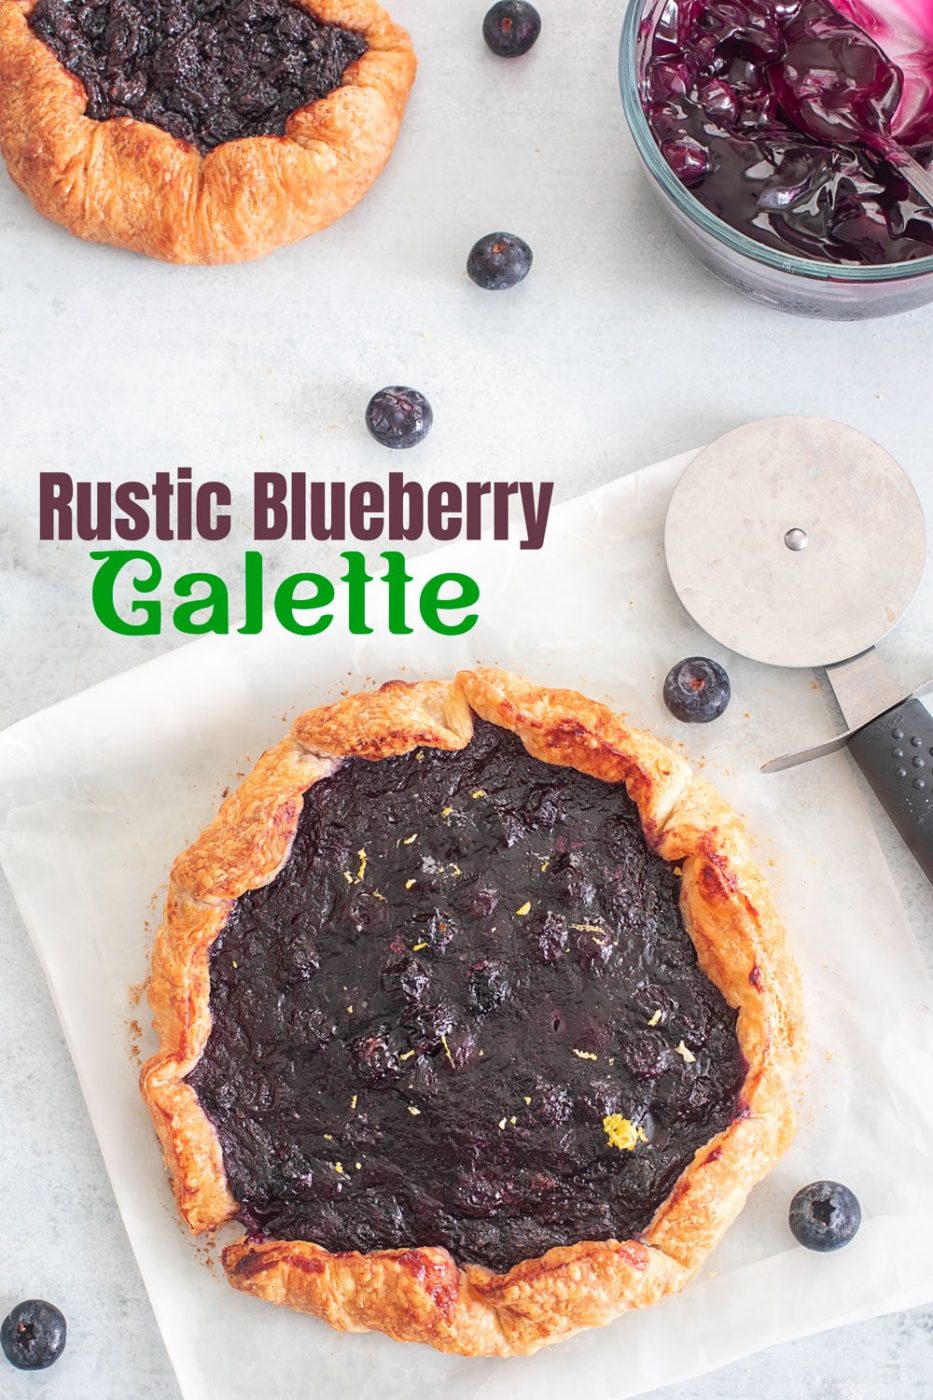 Top view of a blueberry galette with puff pastry crust and a pizza cutter on the side with blueberries.